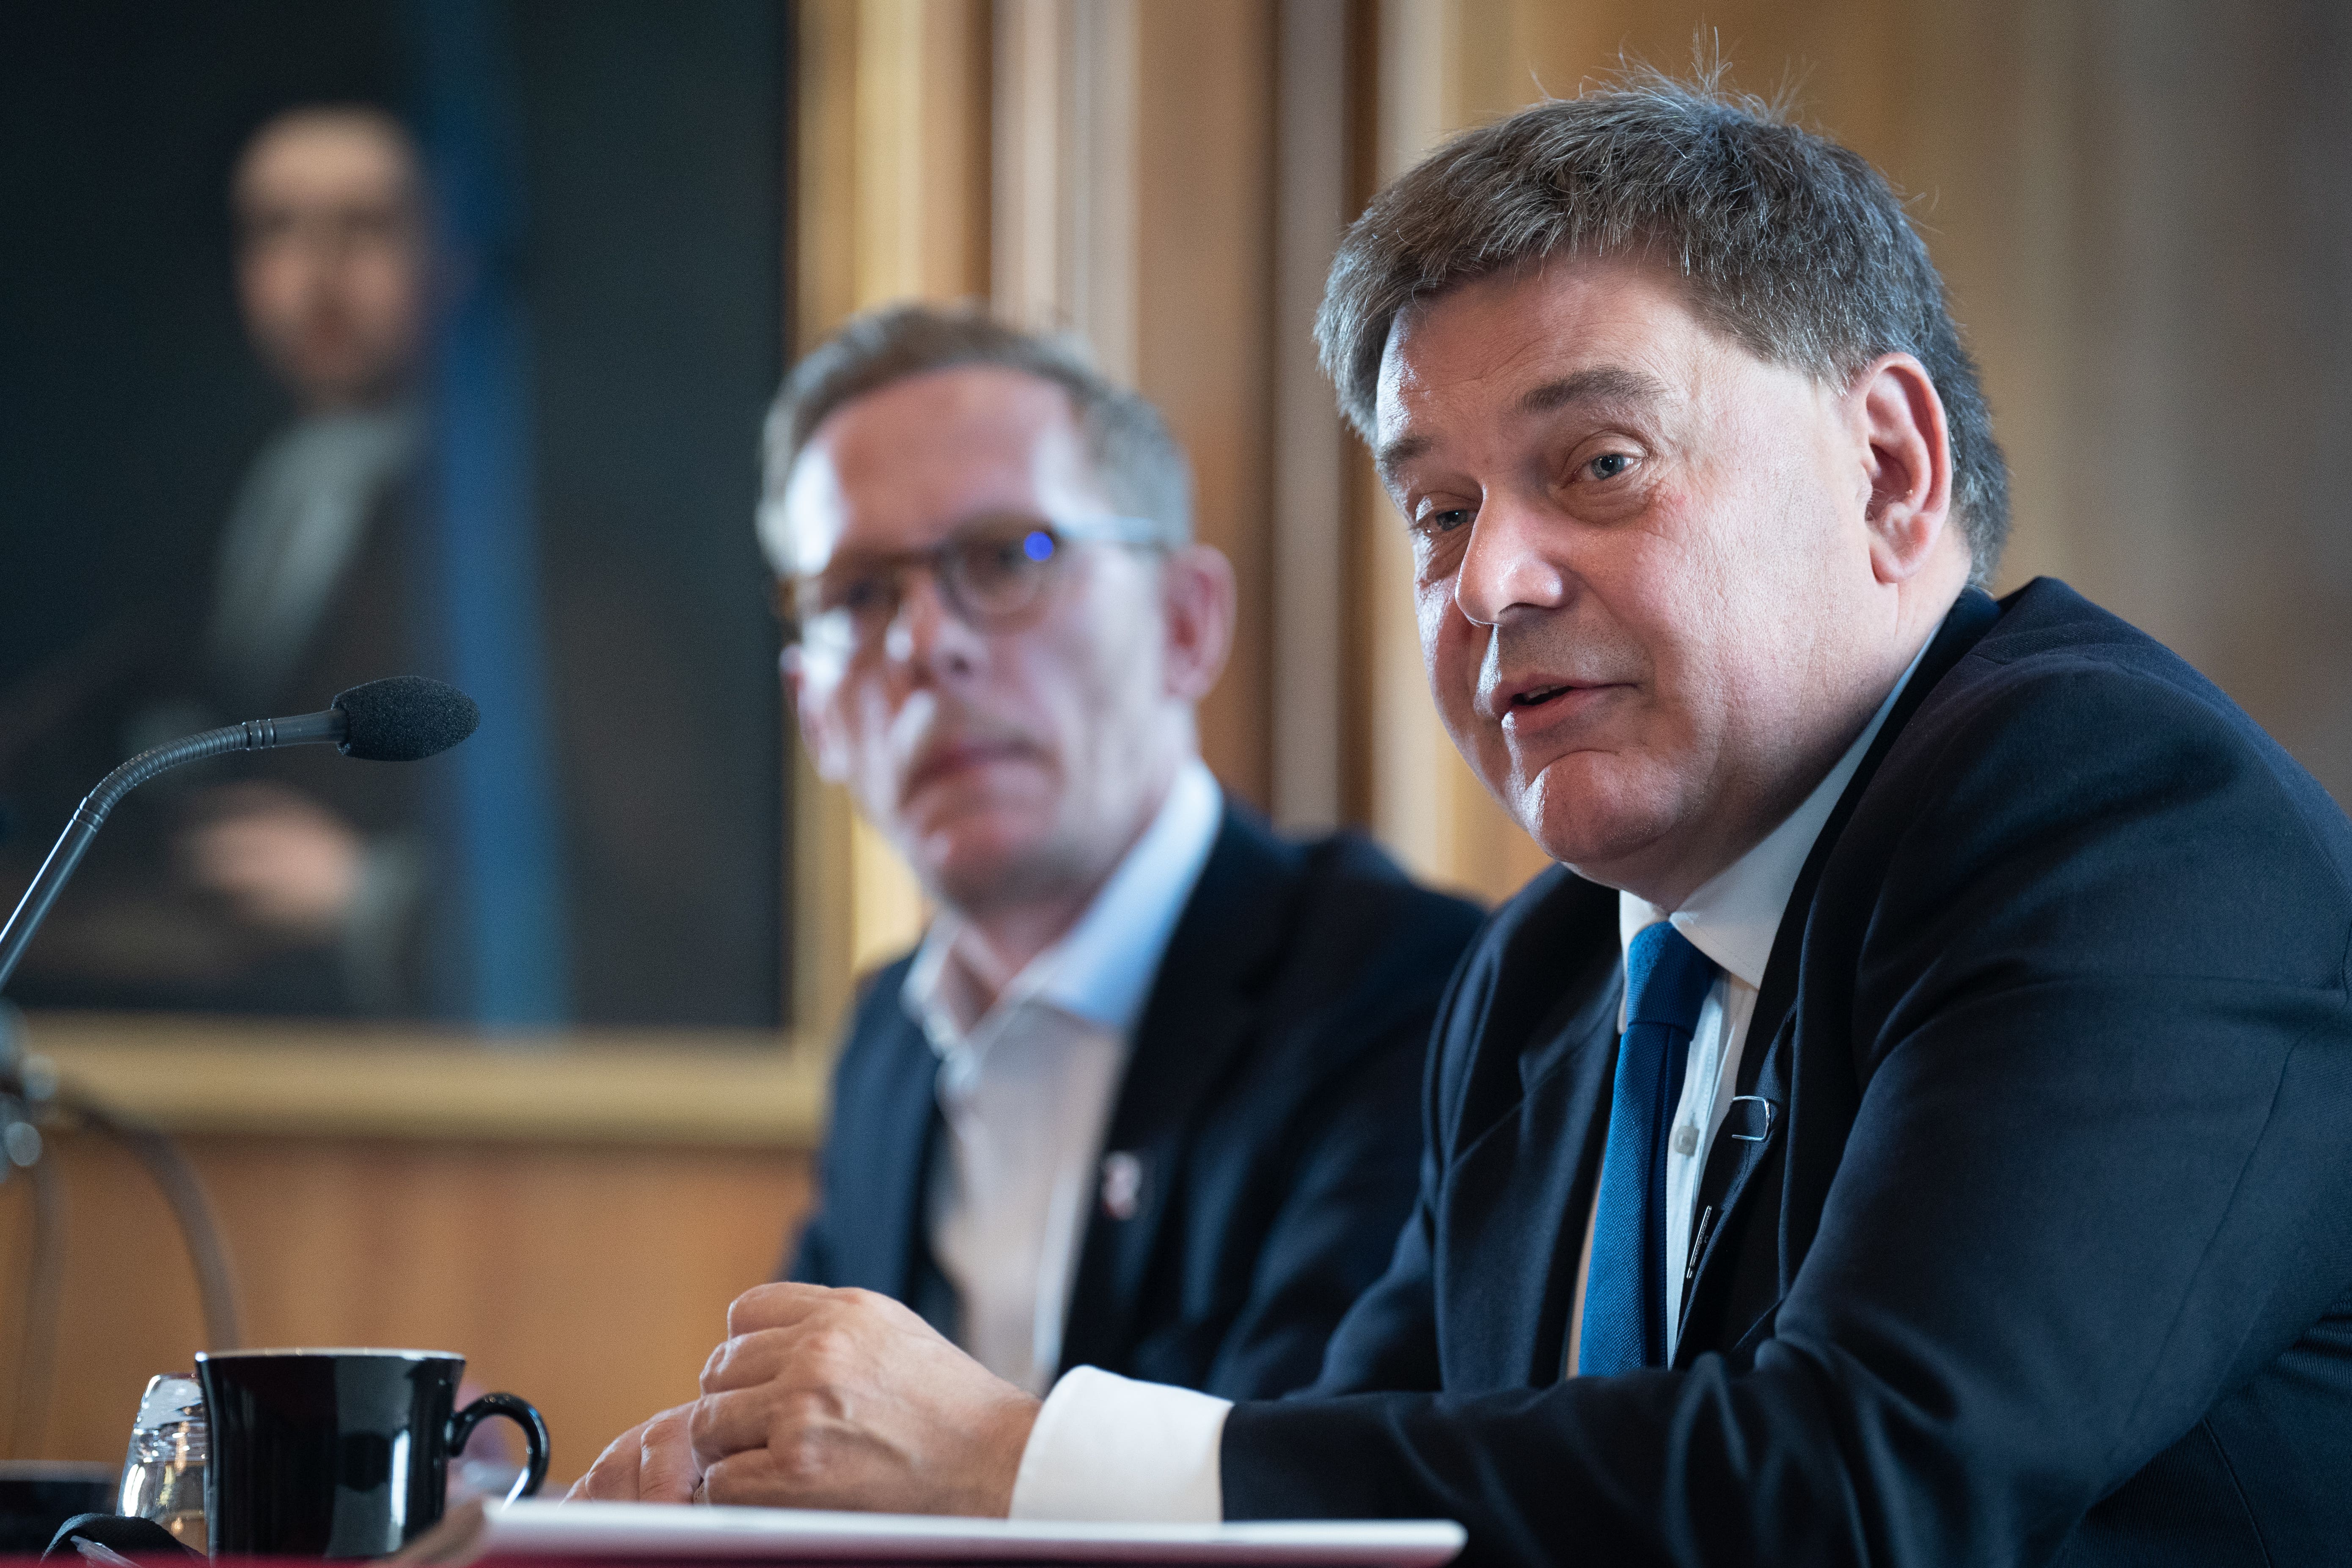 Andrew Bridgen, right, at a Reclaim Party press conference at One Great George Street in Westminster, London